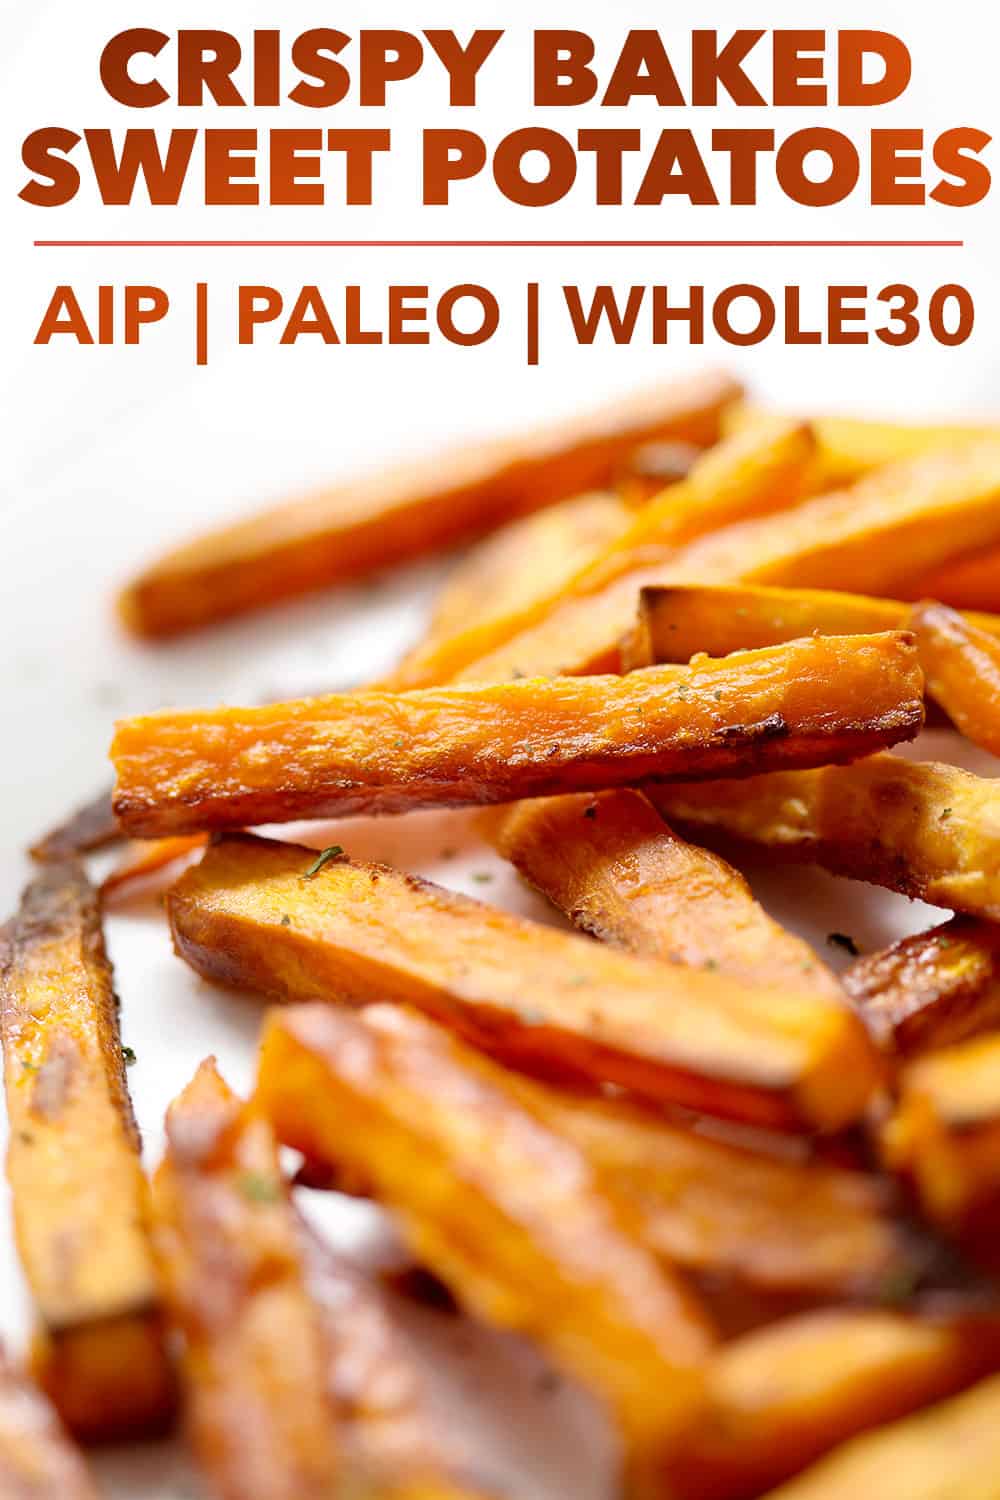 Baked Sweet Potato Fries Recipe — Eat This Not That